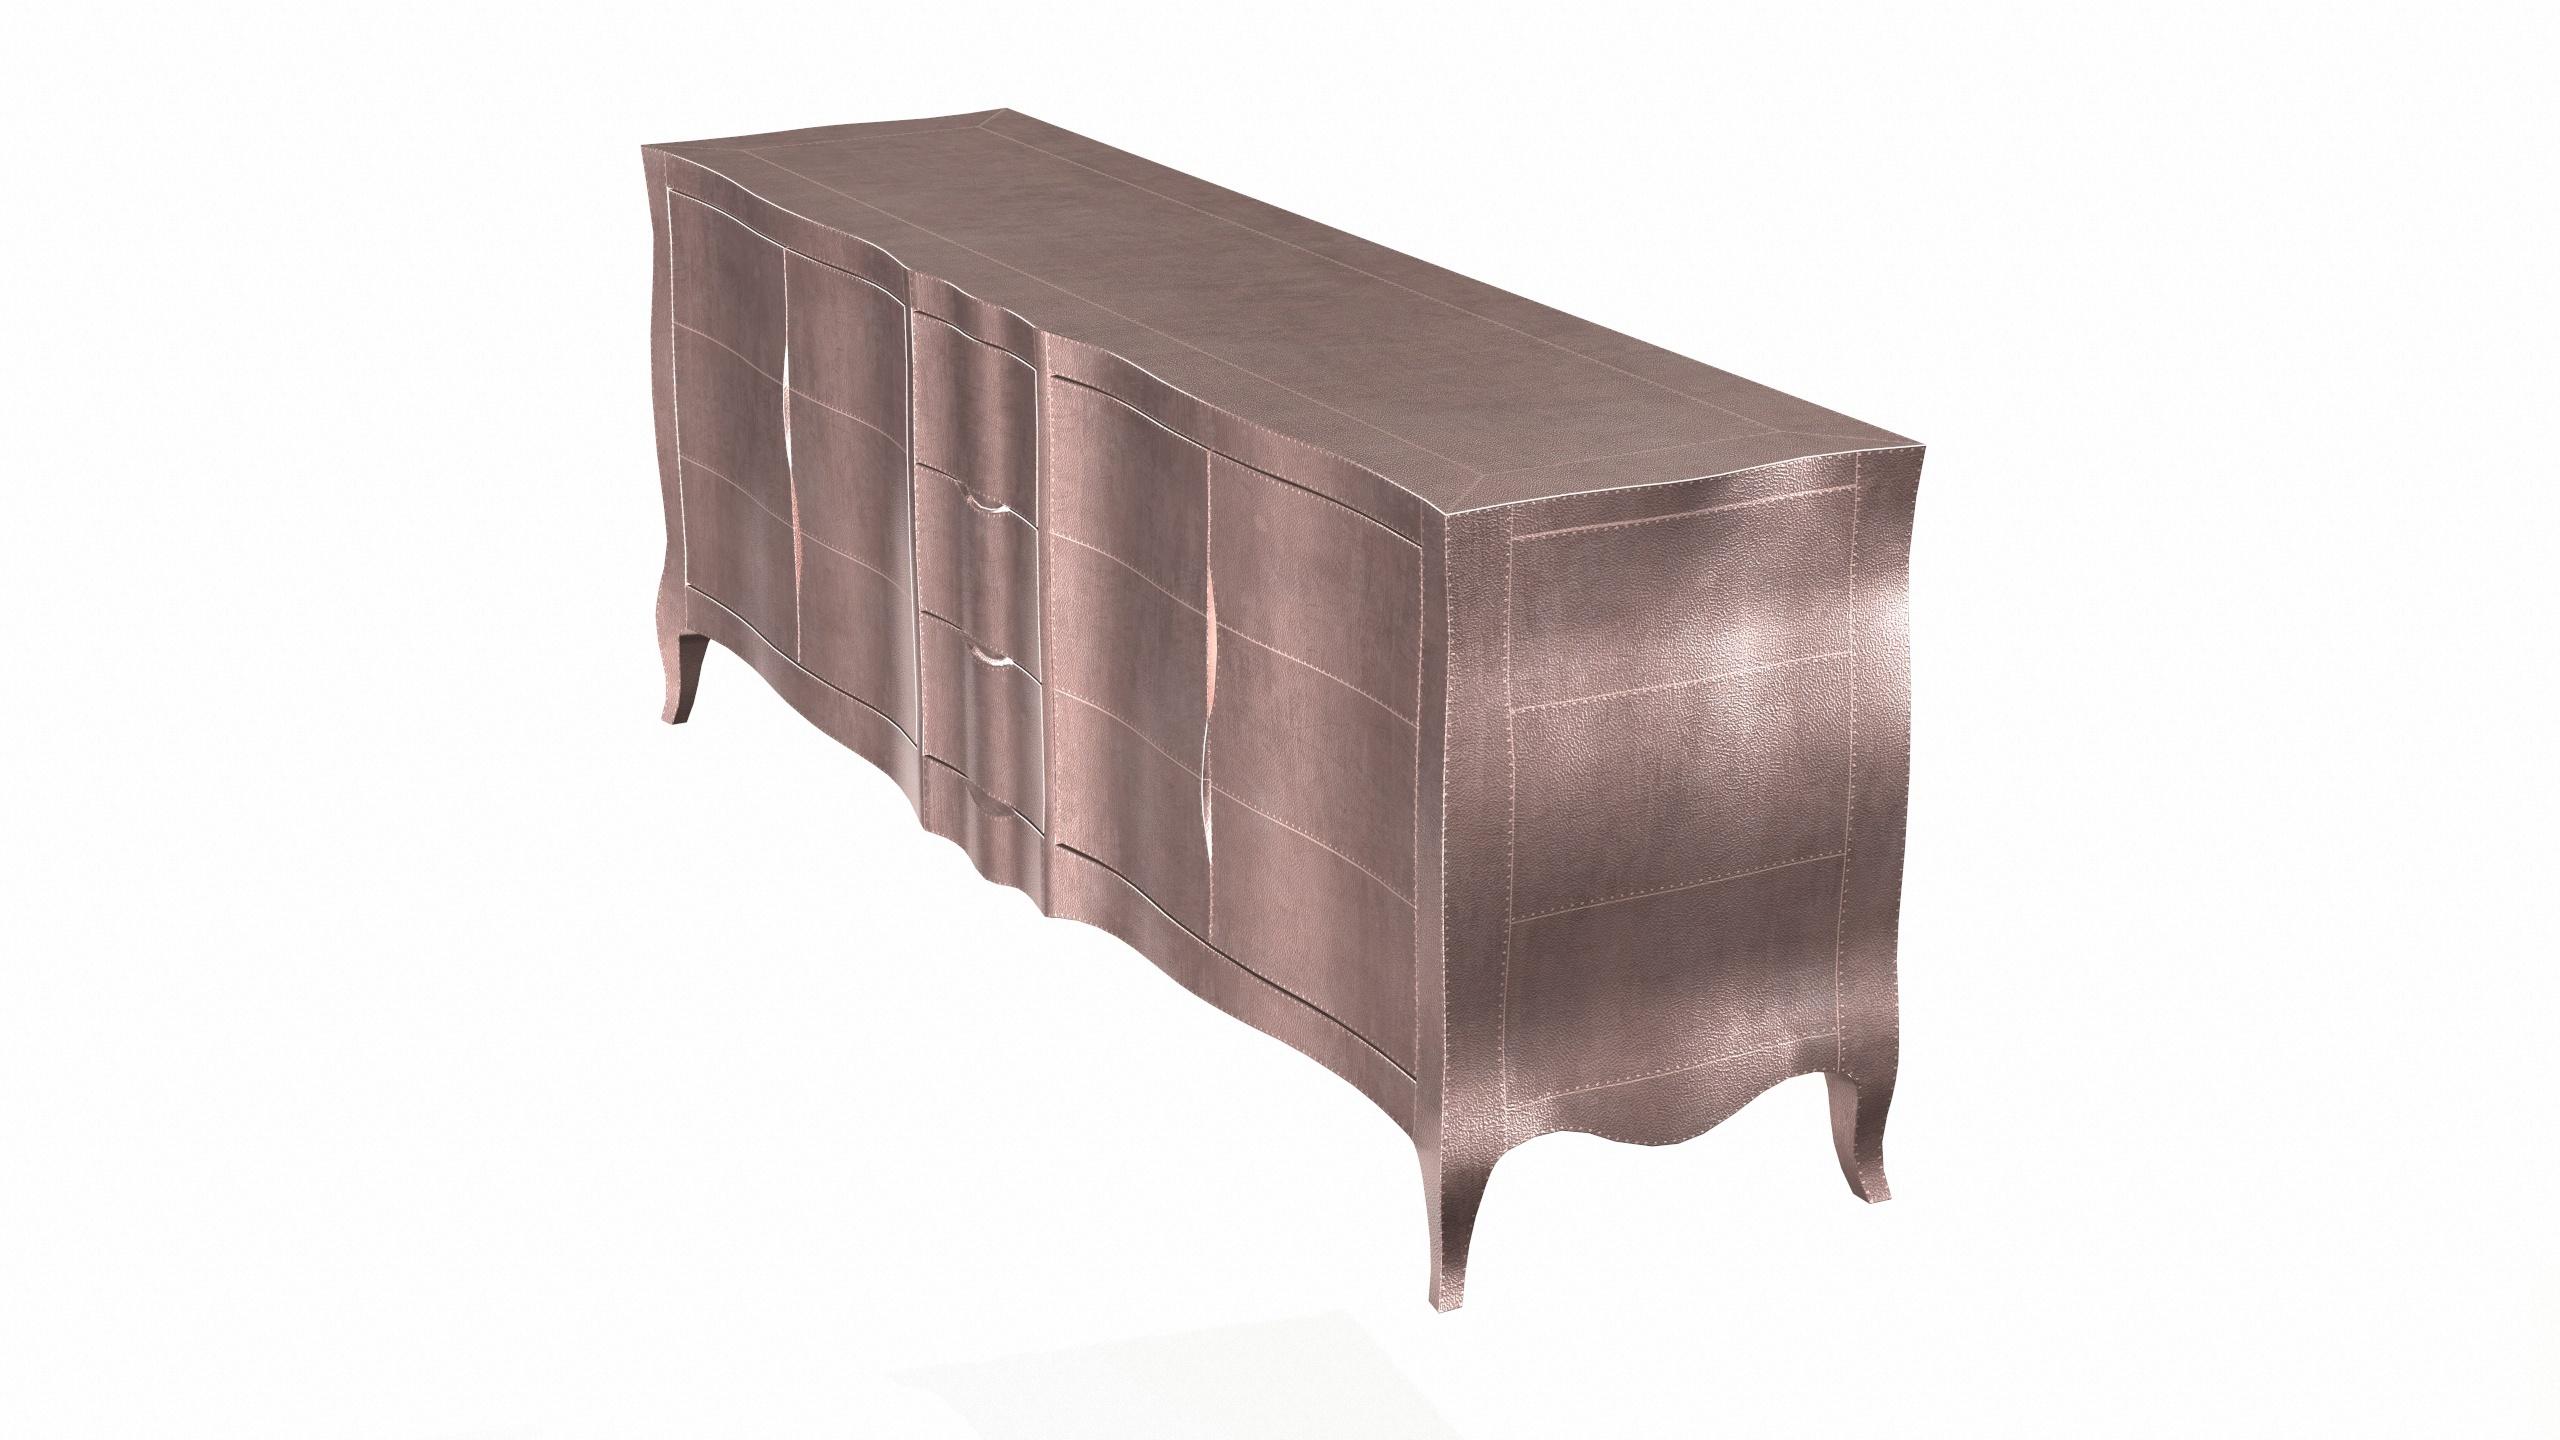 Hand-Carved Louise Credenza Art Deco Cupboards in Fine Hammered Copper by Paul Mathieu For Sale